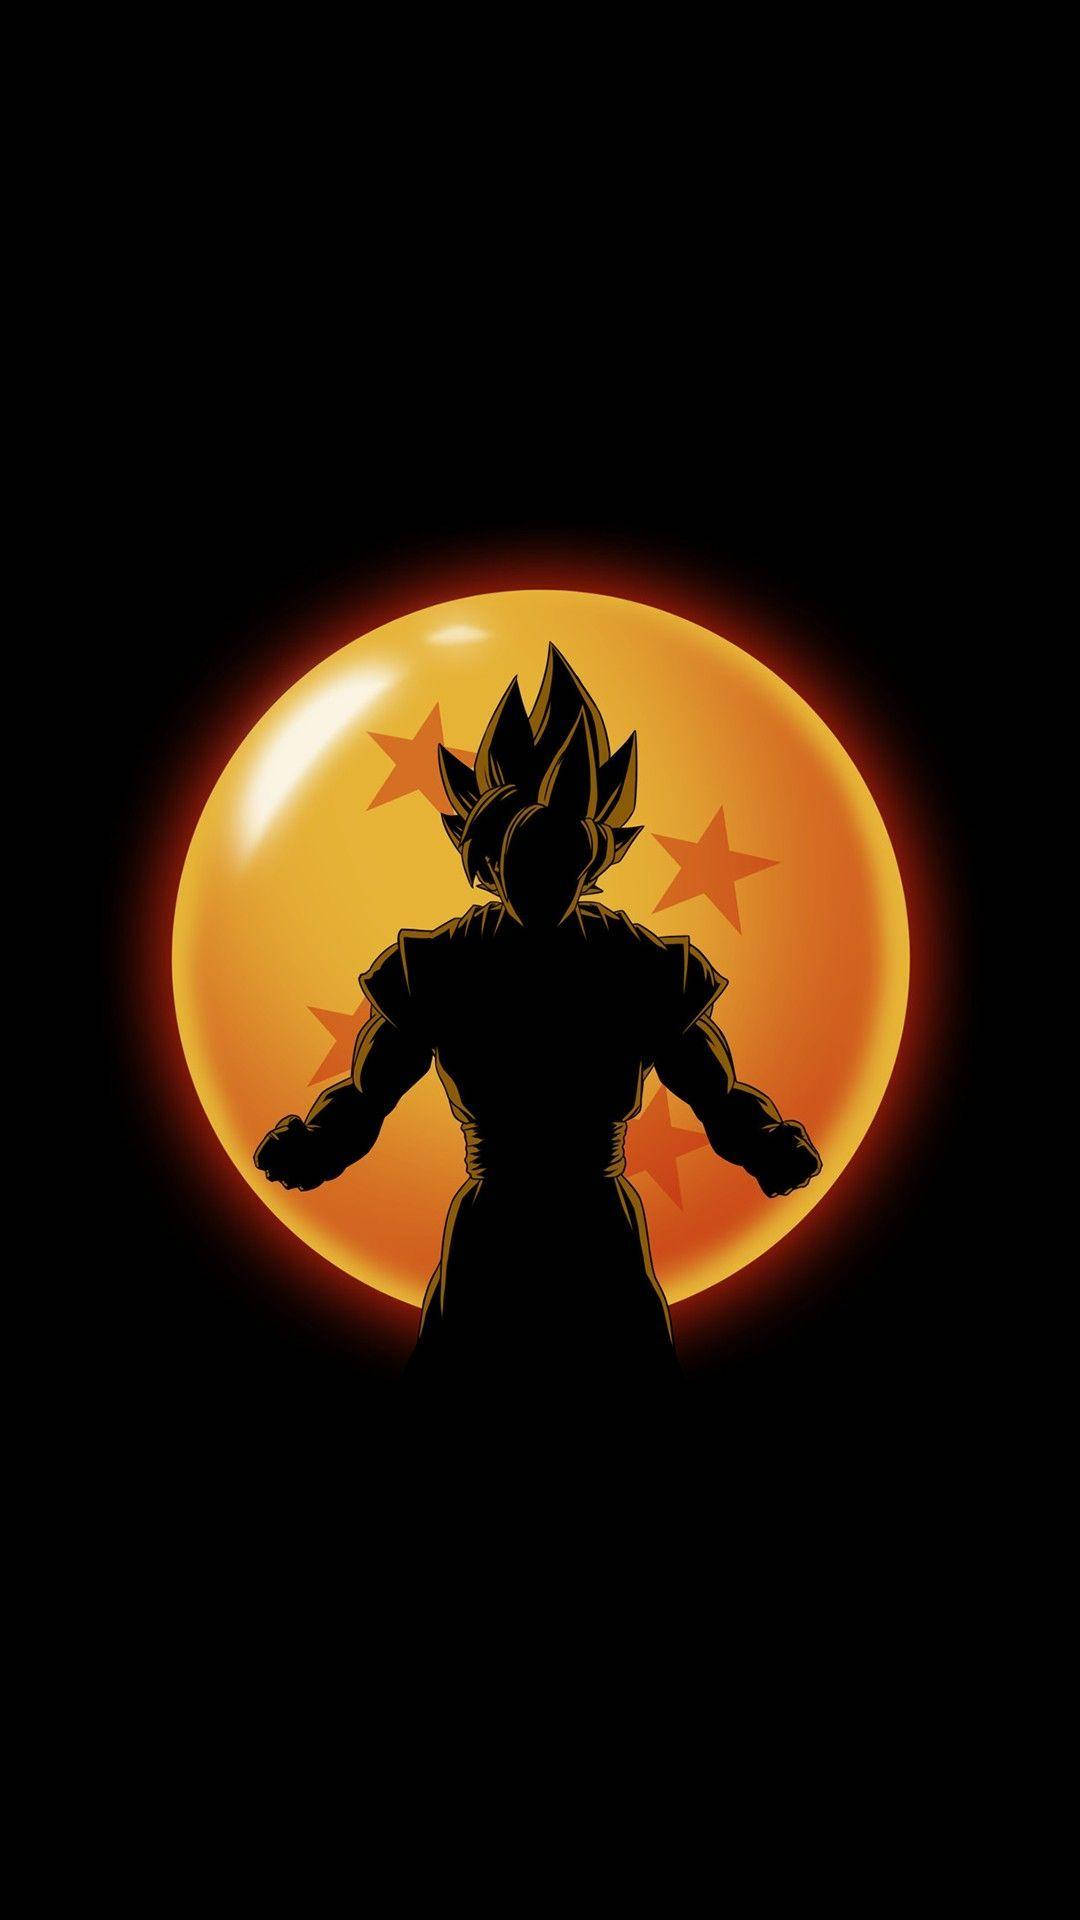 Download Dragon Ball Z wallpapers for iPhone in 2023  iGeeksBlog  Anime dragon  ball goku Dragon ball wallpapers Dragon ball z iphone wallpaper